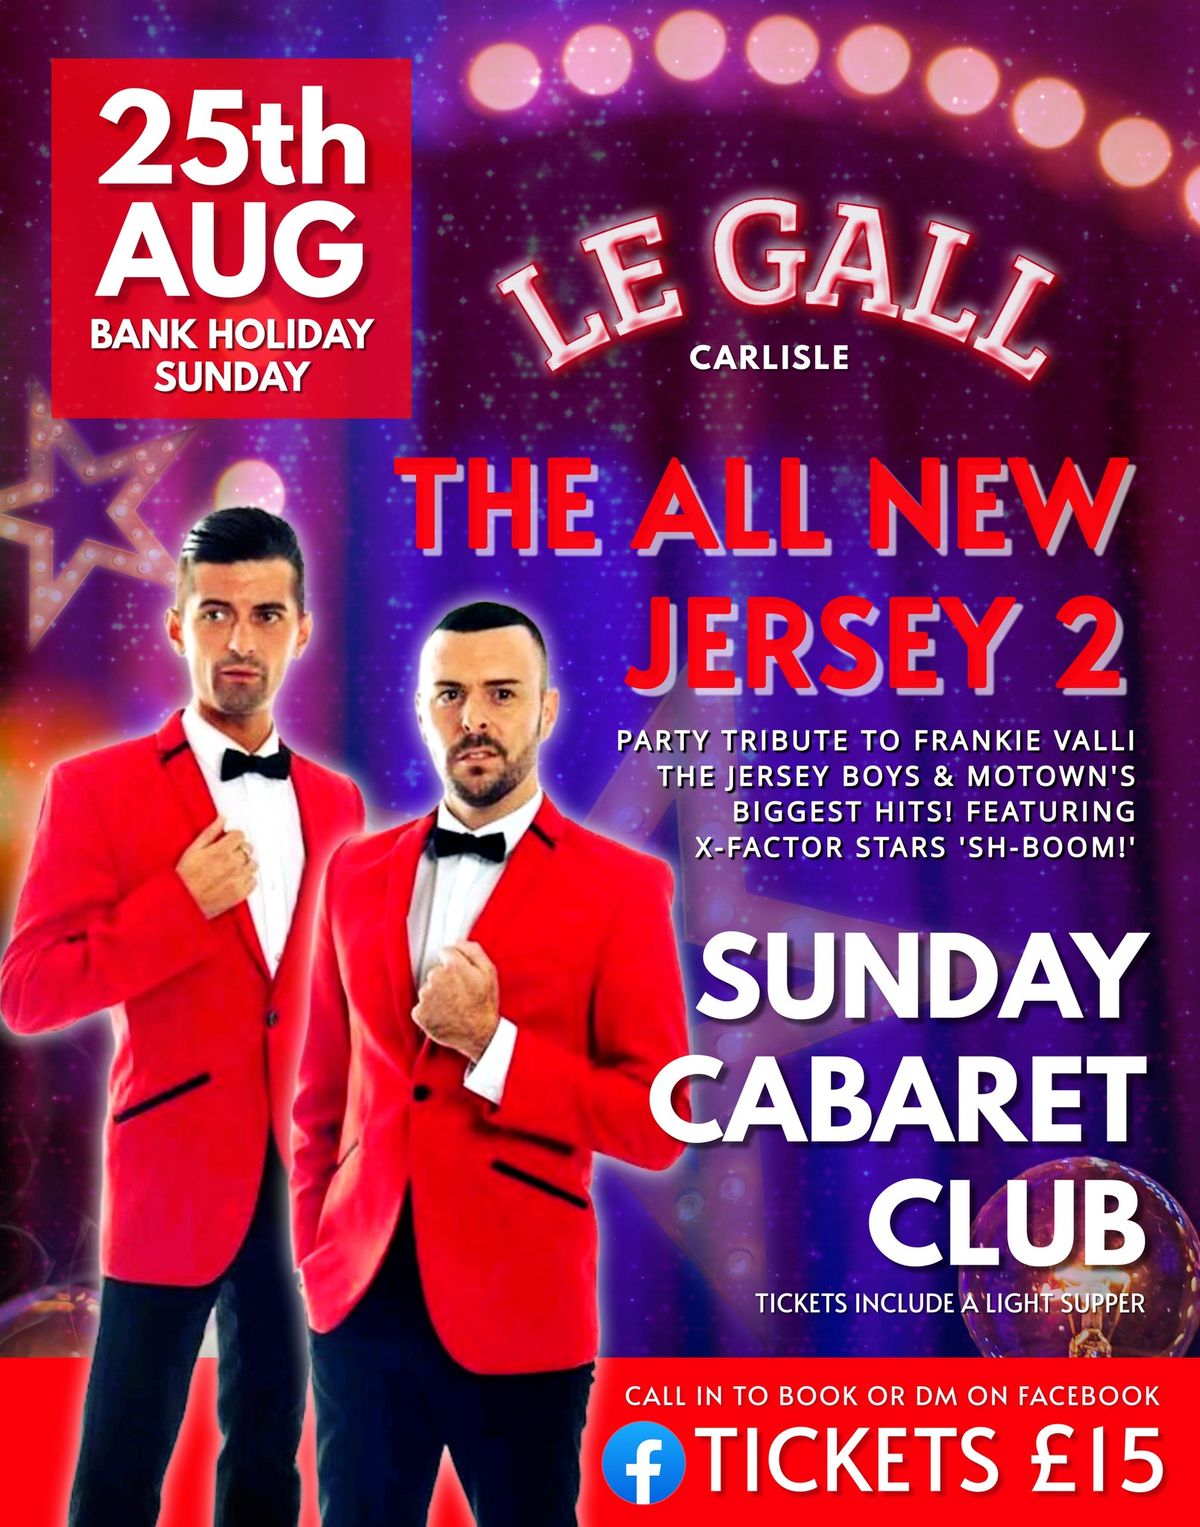 Bank Holiday Sunday Cabaret - The All New Jersey 2! 